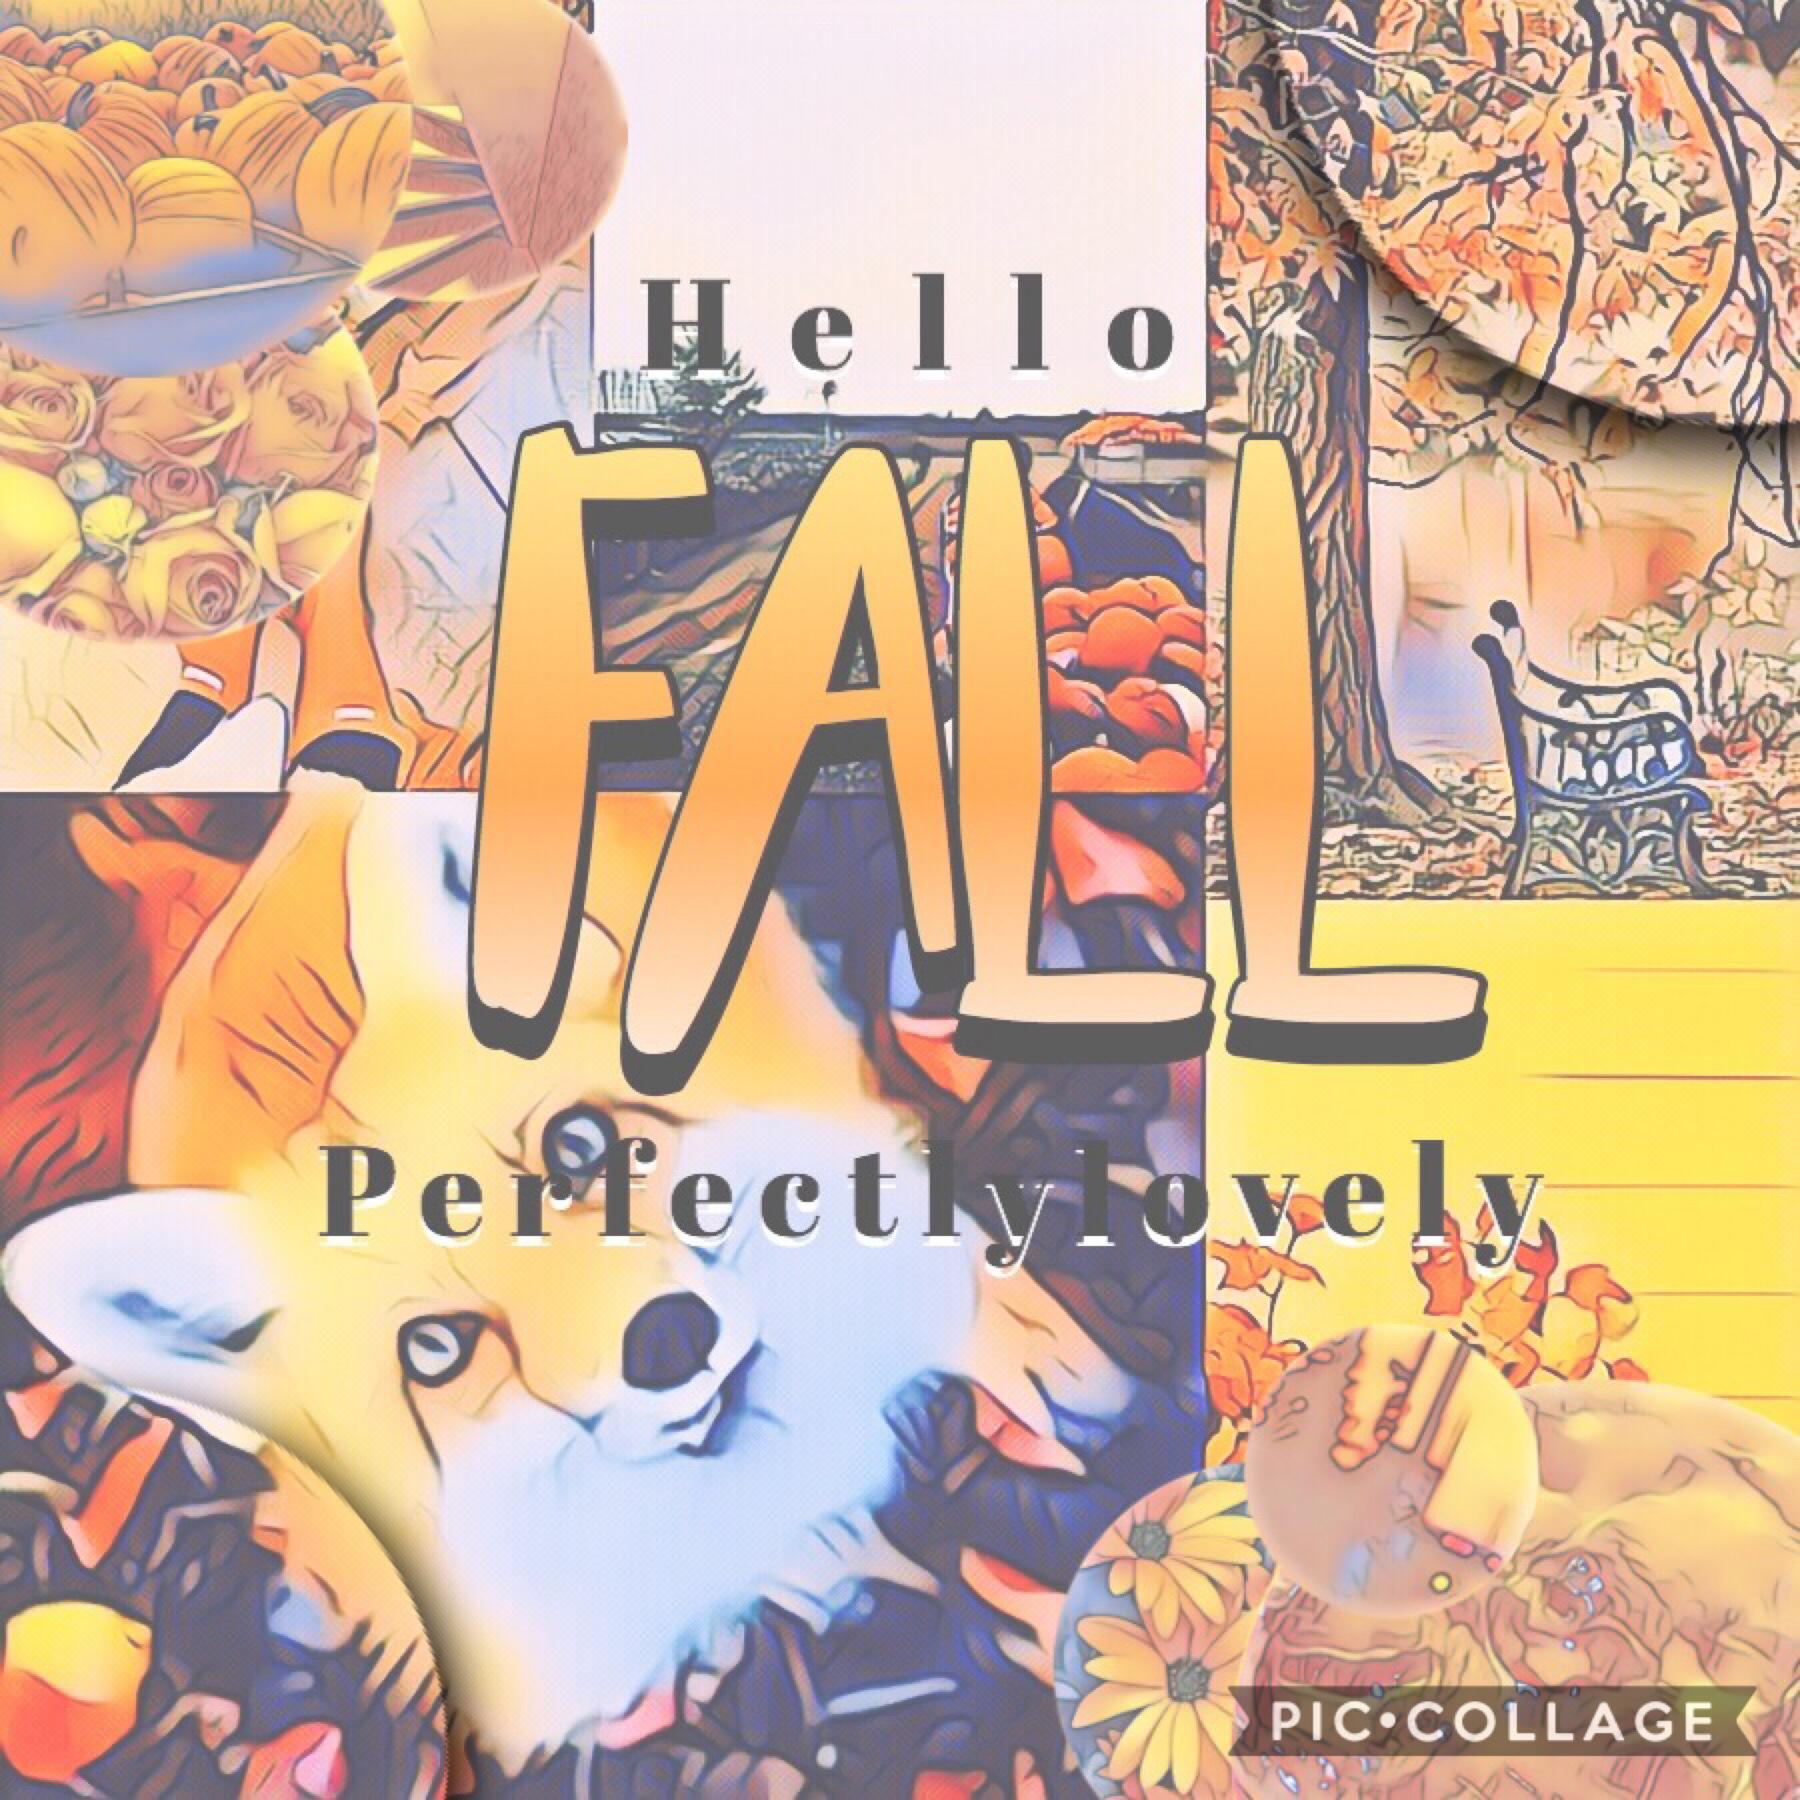 Tappy
Fall edit! What do you guys think?
I personally like it a lot. Should I do one for every season or month?
Qotd: should I do one of these for every season, or every month?
Aotd: idk lol